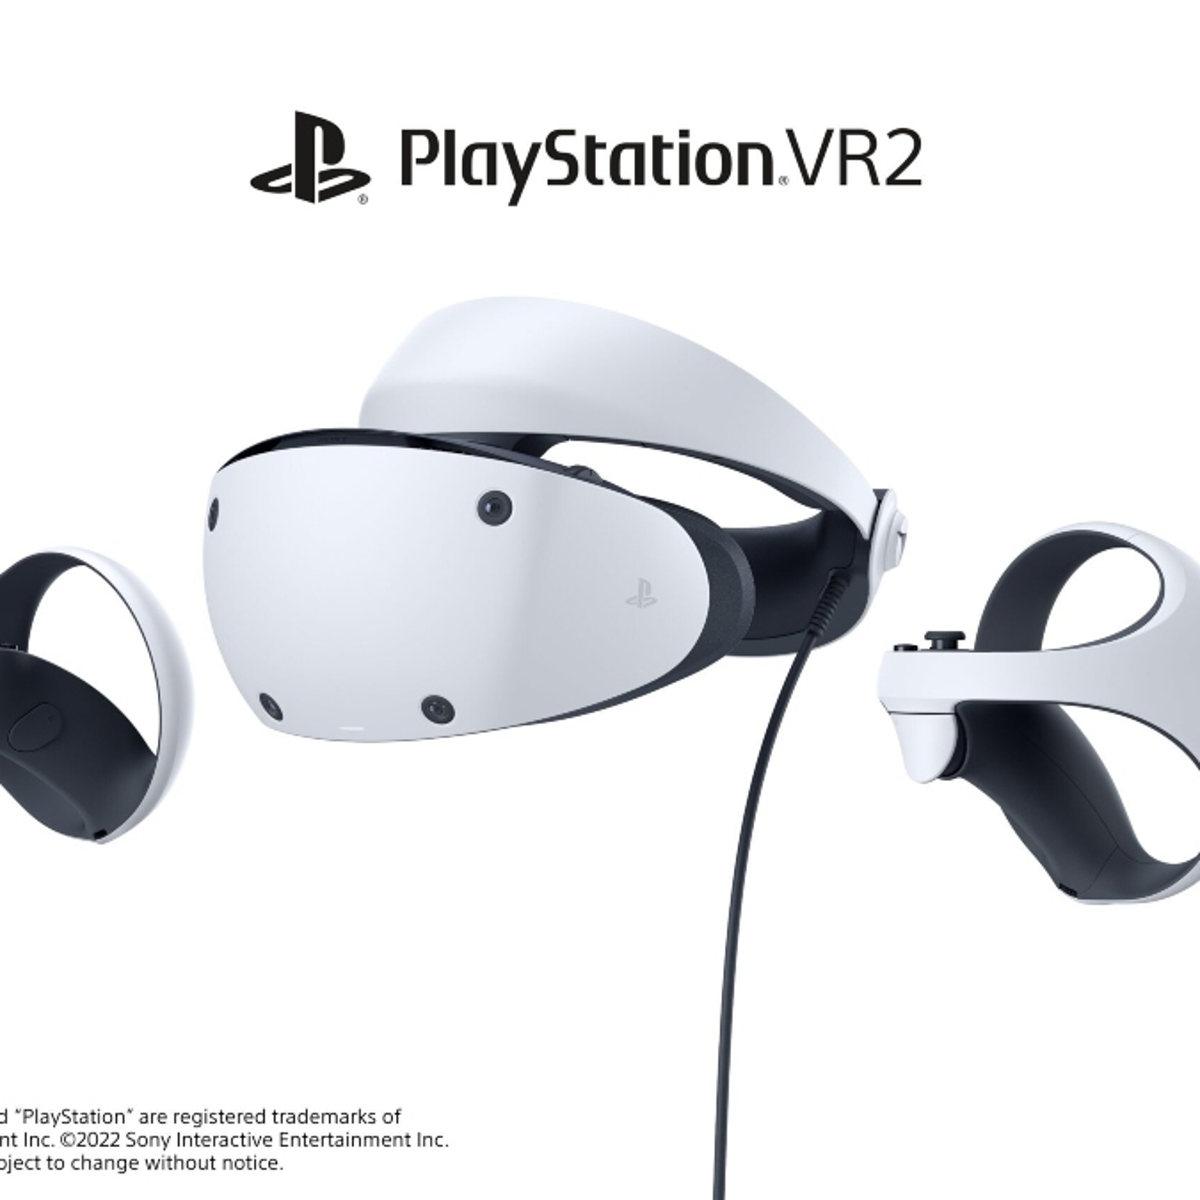 PlayStation VR2 - Official 'Play in a Whole New Way' Trailer 